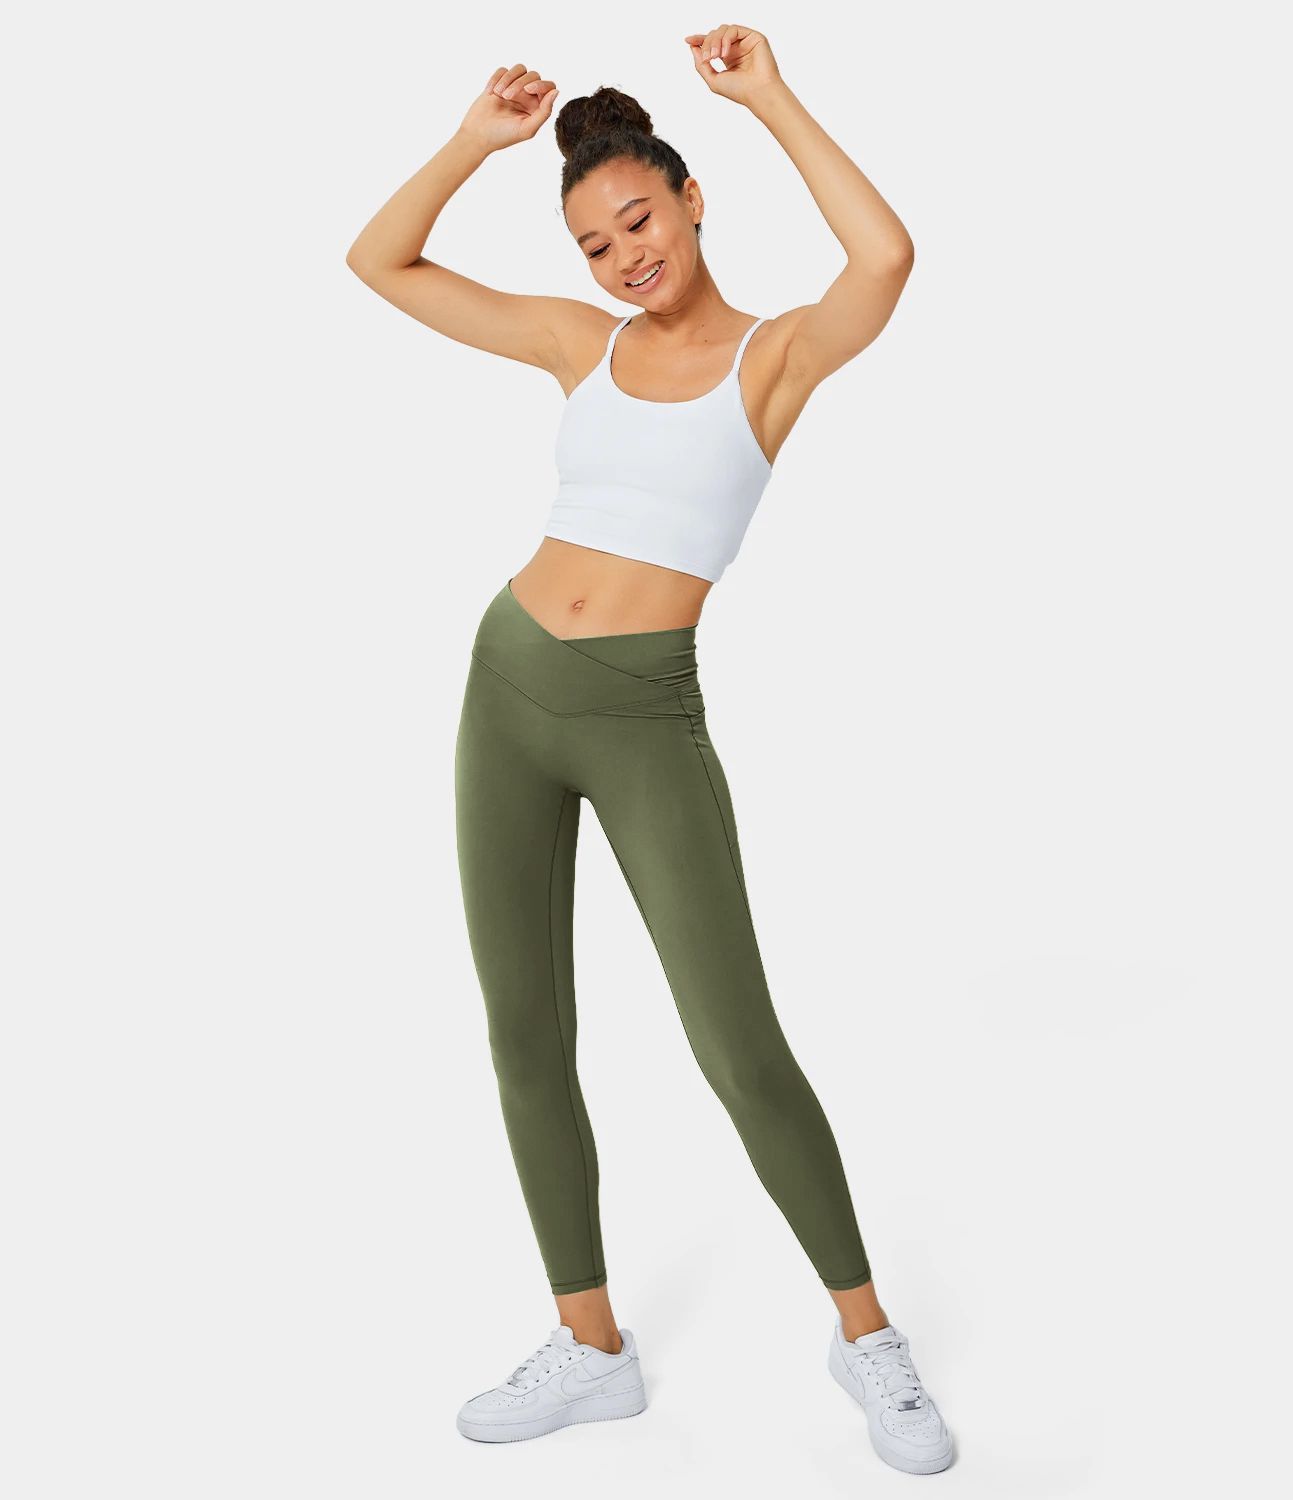 Halara Seamless Sculpting Leggings in Mint/Green NWT Sold out Size Small -  $39 New With Tags - From Love